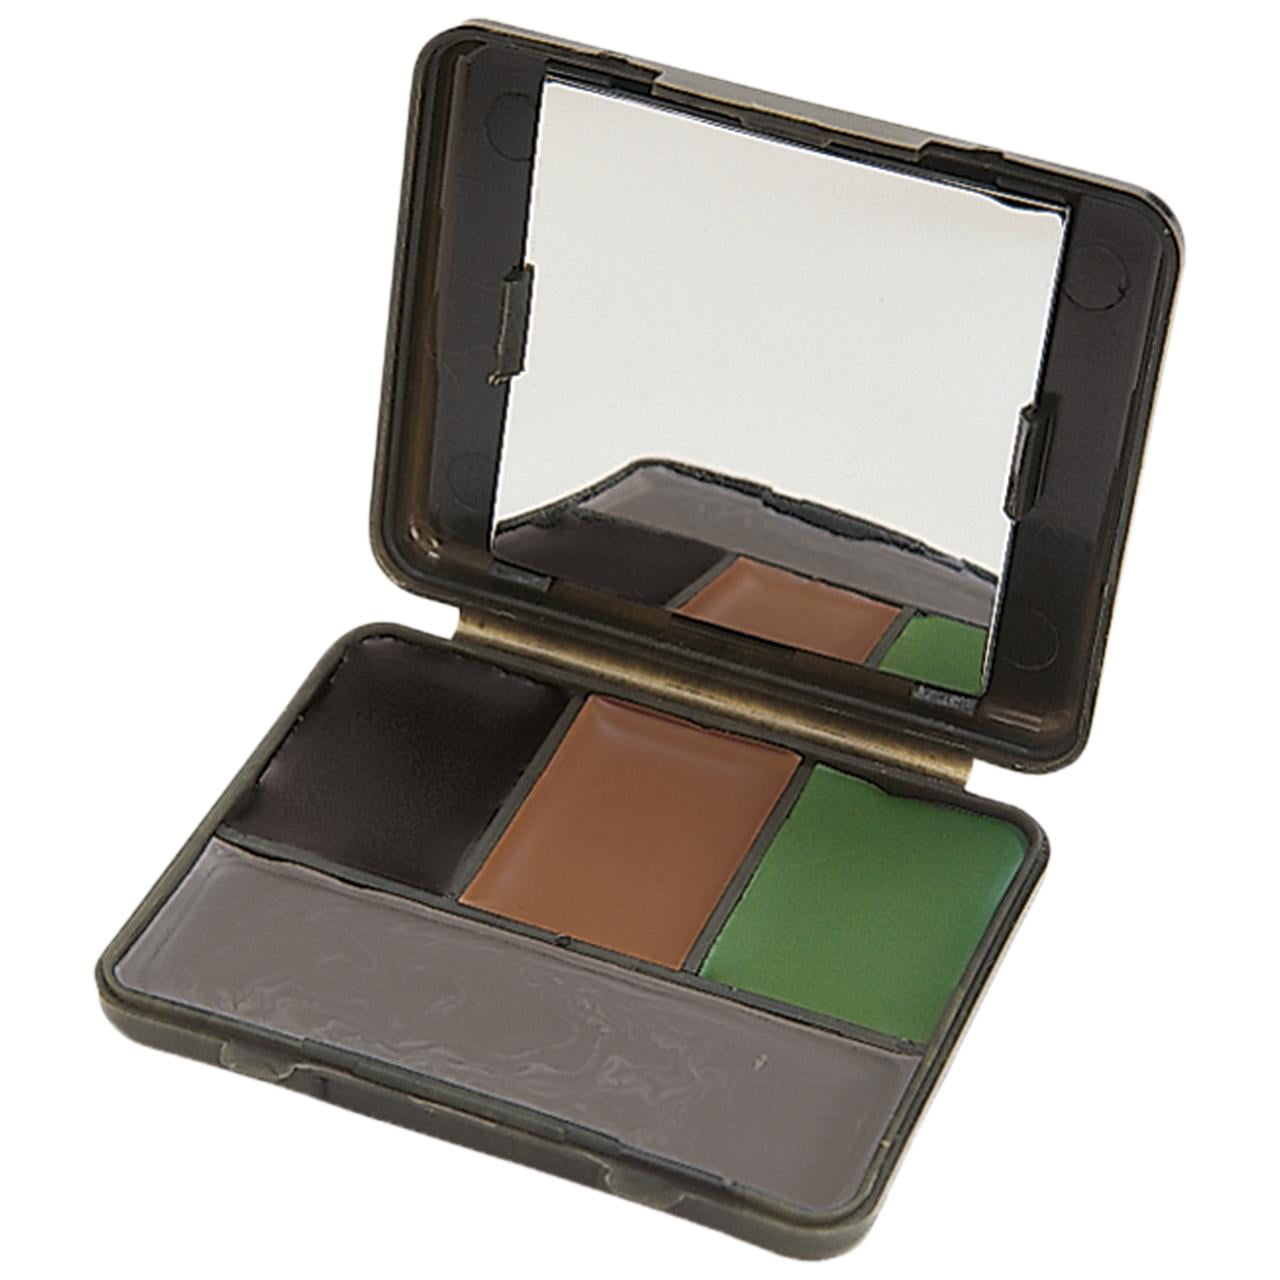 Details about   Mossy Oak 4-Color Camo Makeup Kit w/Mirror Olive Drab/Brown/Black/Gray 